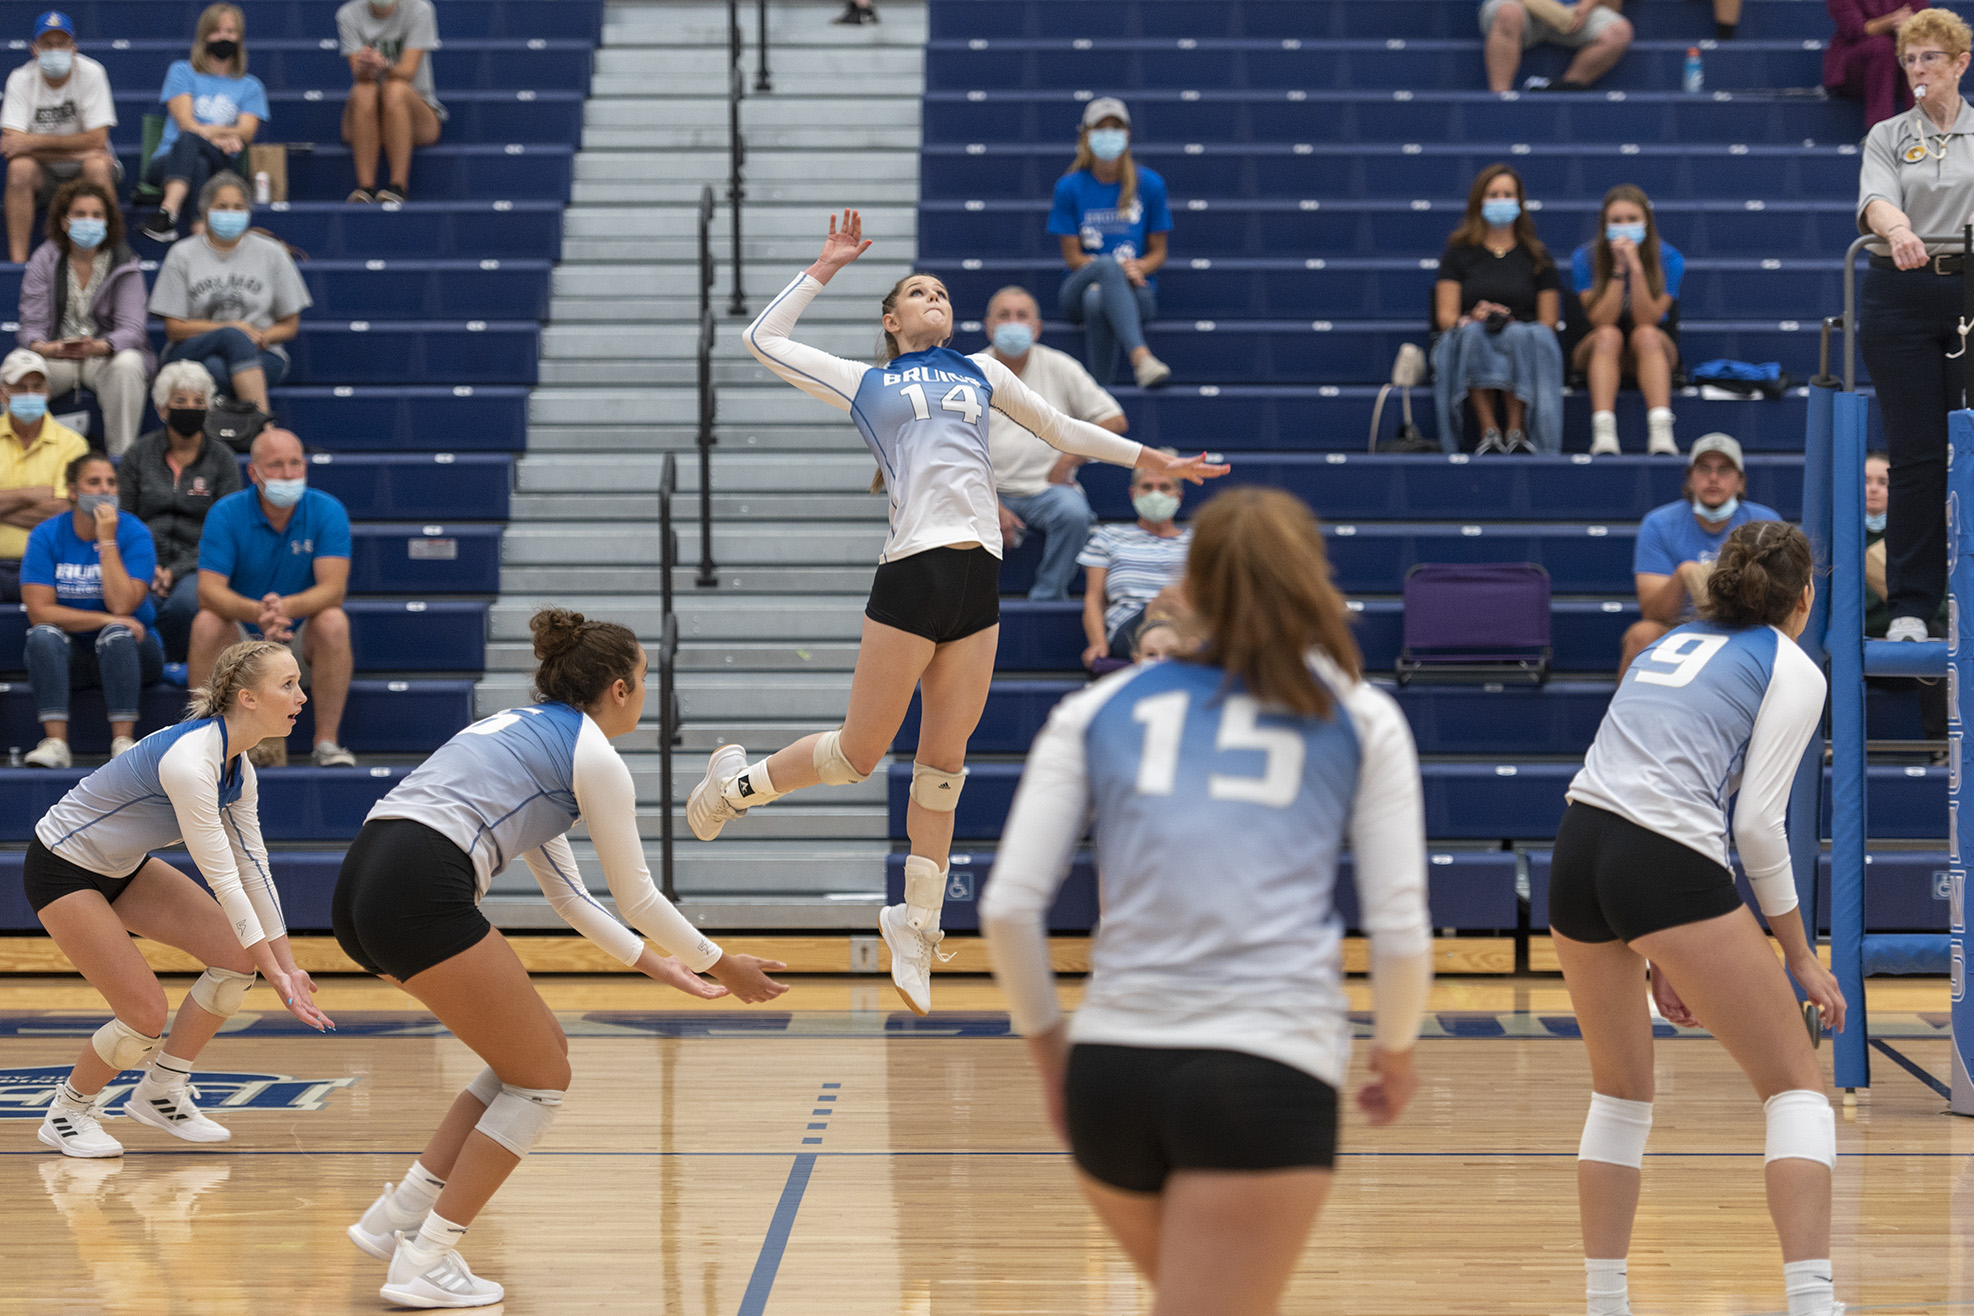 KCC's women's volleyball team competes during a match at home.